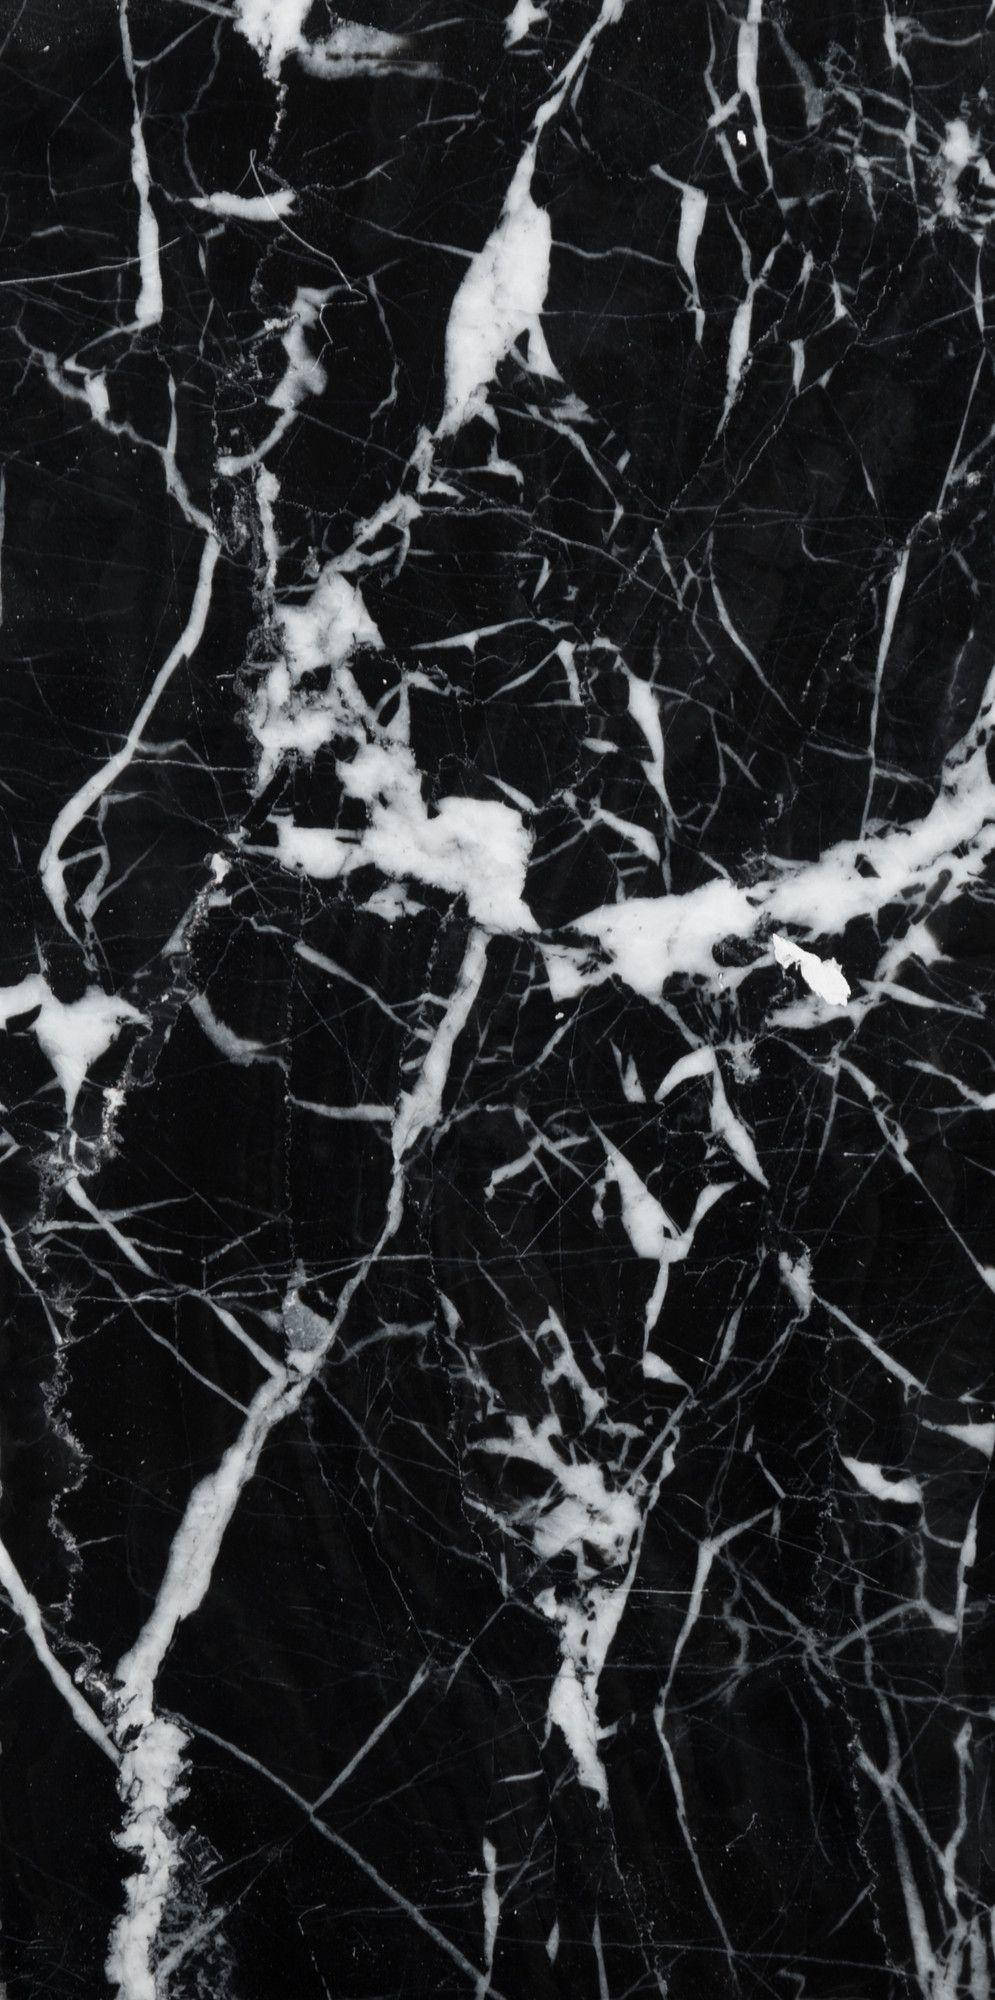 Dazzling Black Marble Iphone Wallpaper With White Splashes Wallpaper